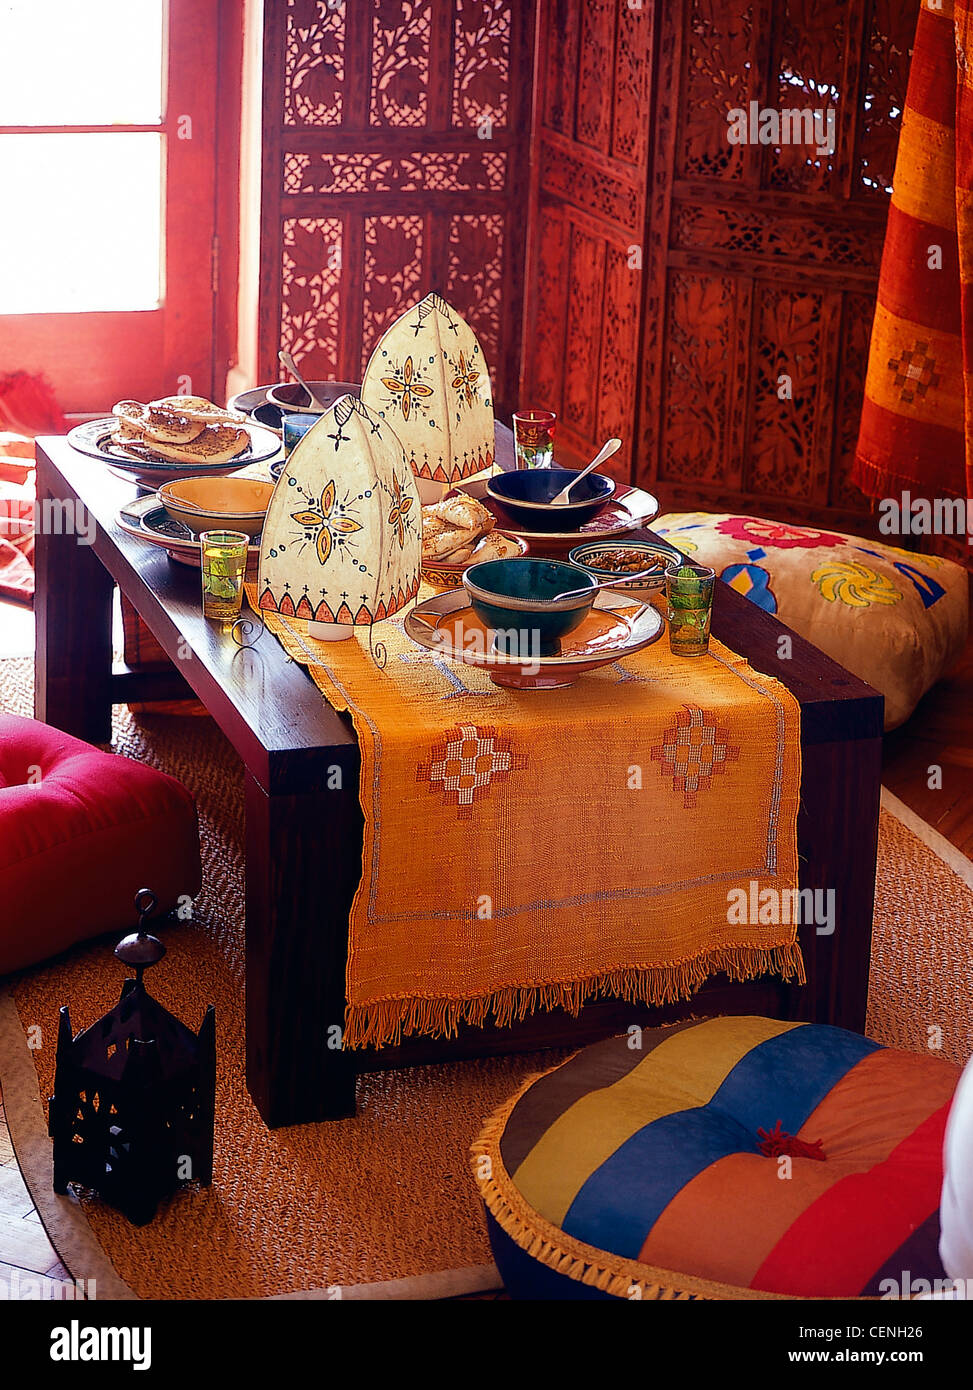 Moroccan Feast Low table patterned runner, decorated paper lanterns, bowls of moroccan food, large bright coloured flocushions Stock Photo